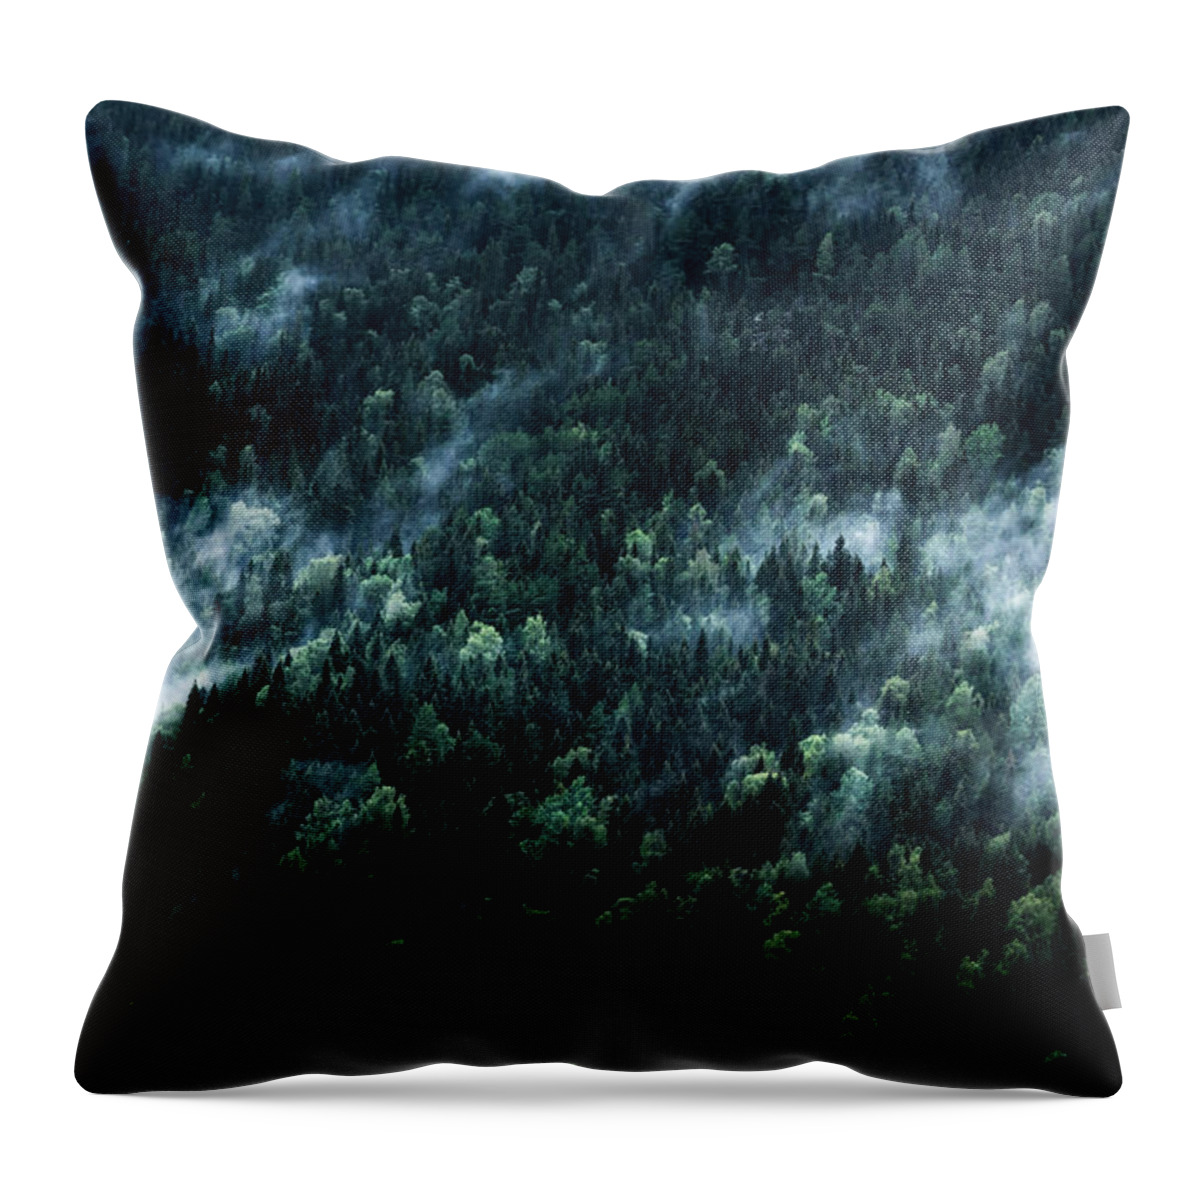 Fog Throw Pillow featuring the photograph Foggy Forest Mountain by Nicklas Gustafsson